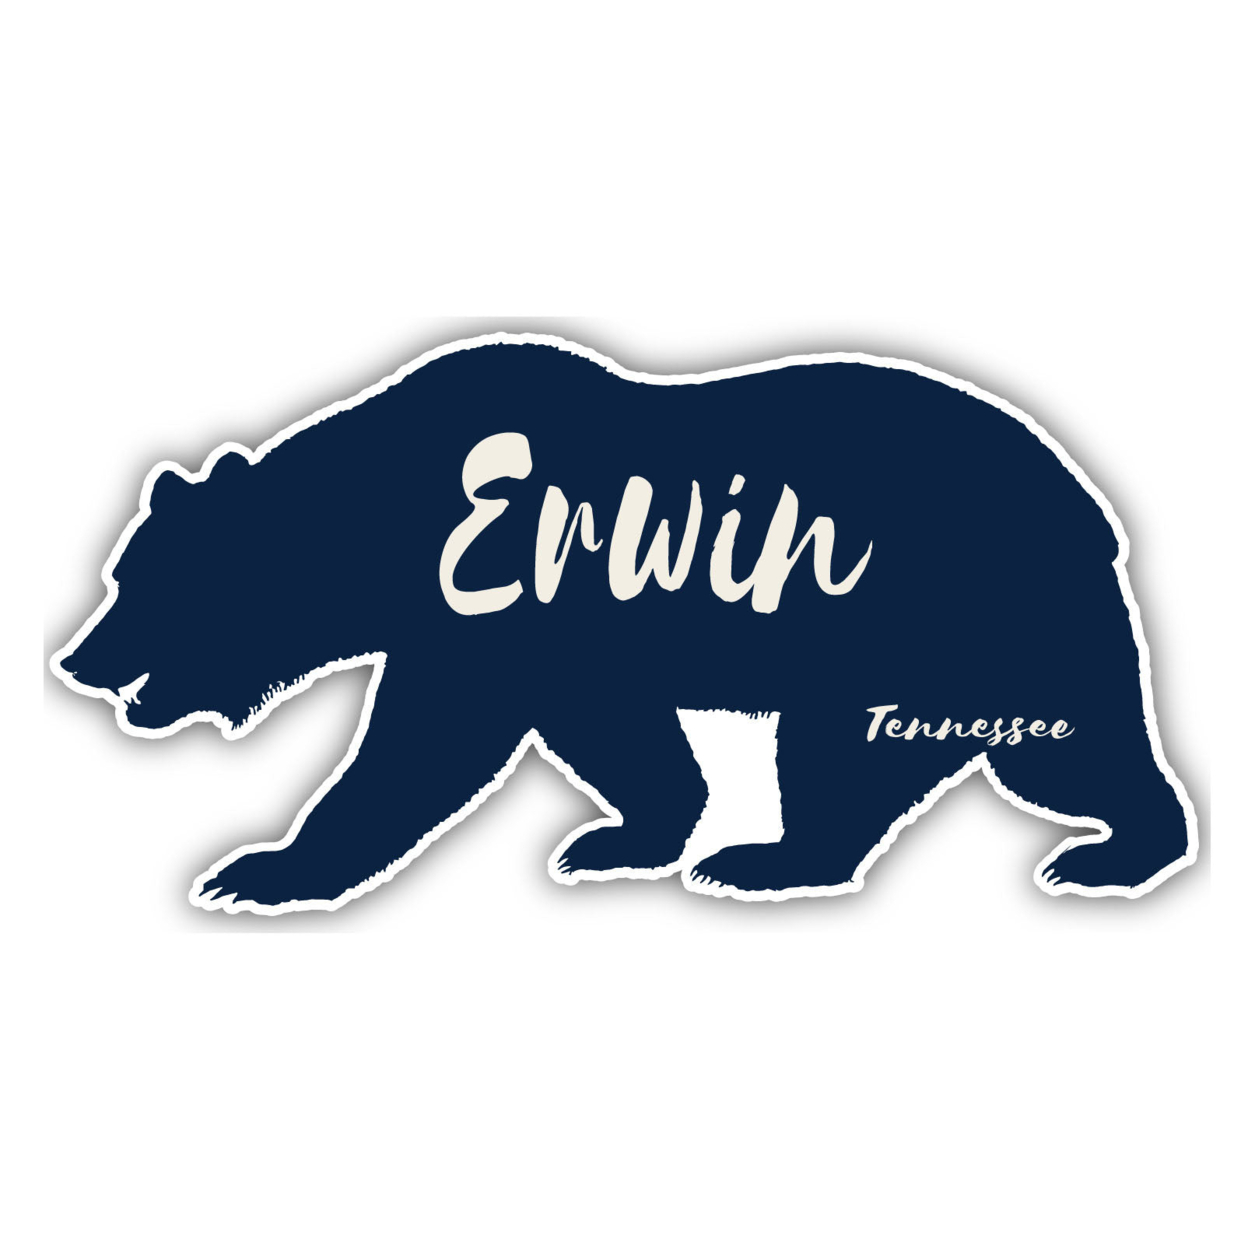 Erwin Tennessee Souvenir Decorative Stickers (Choose Theme And Size) - Single Unit, 6-Inch, Bear